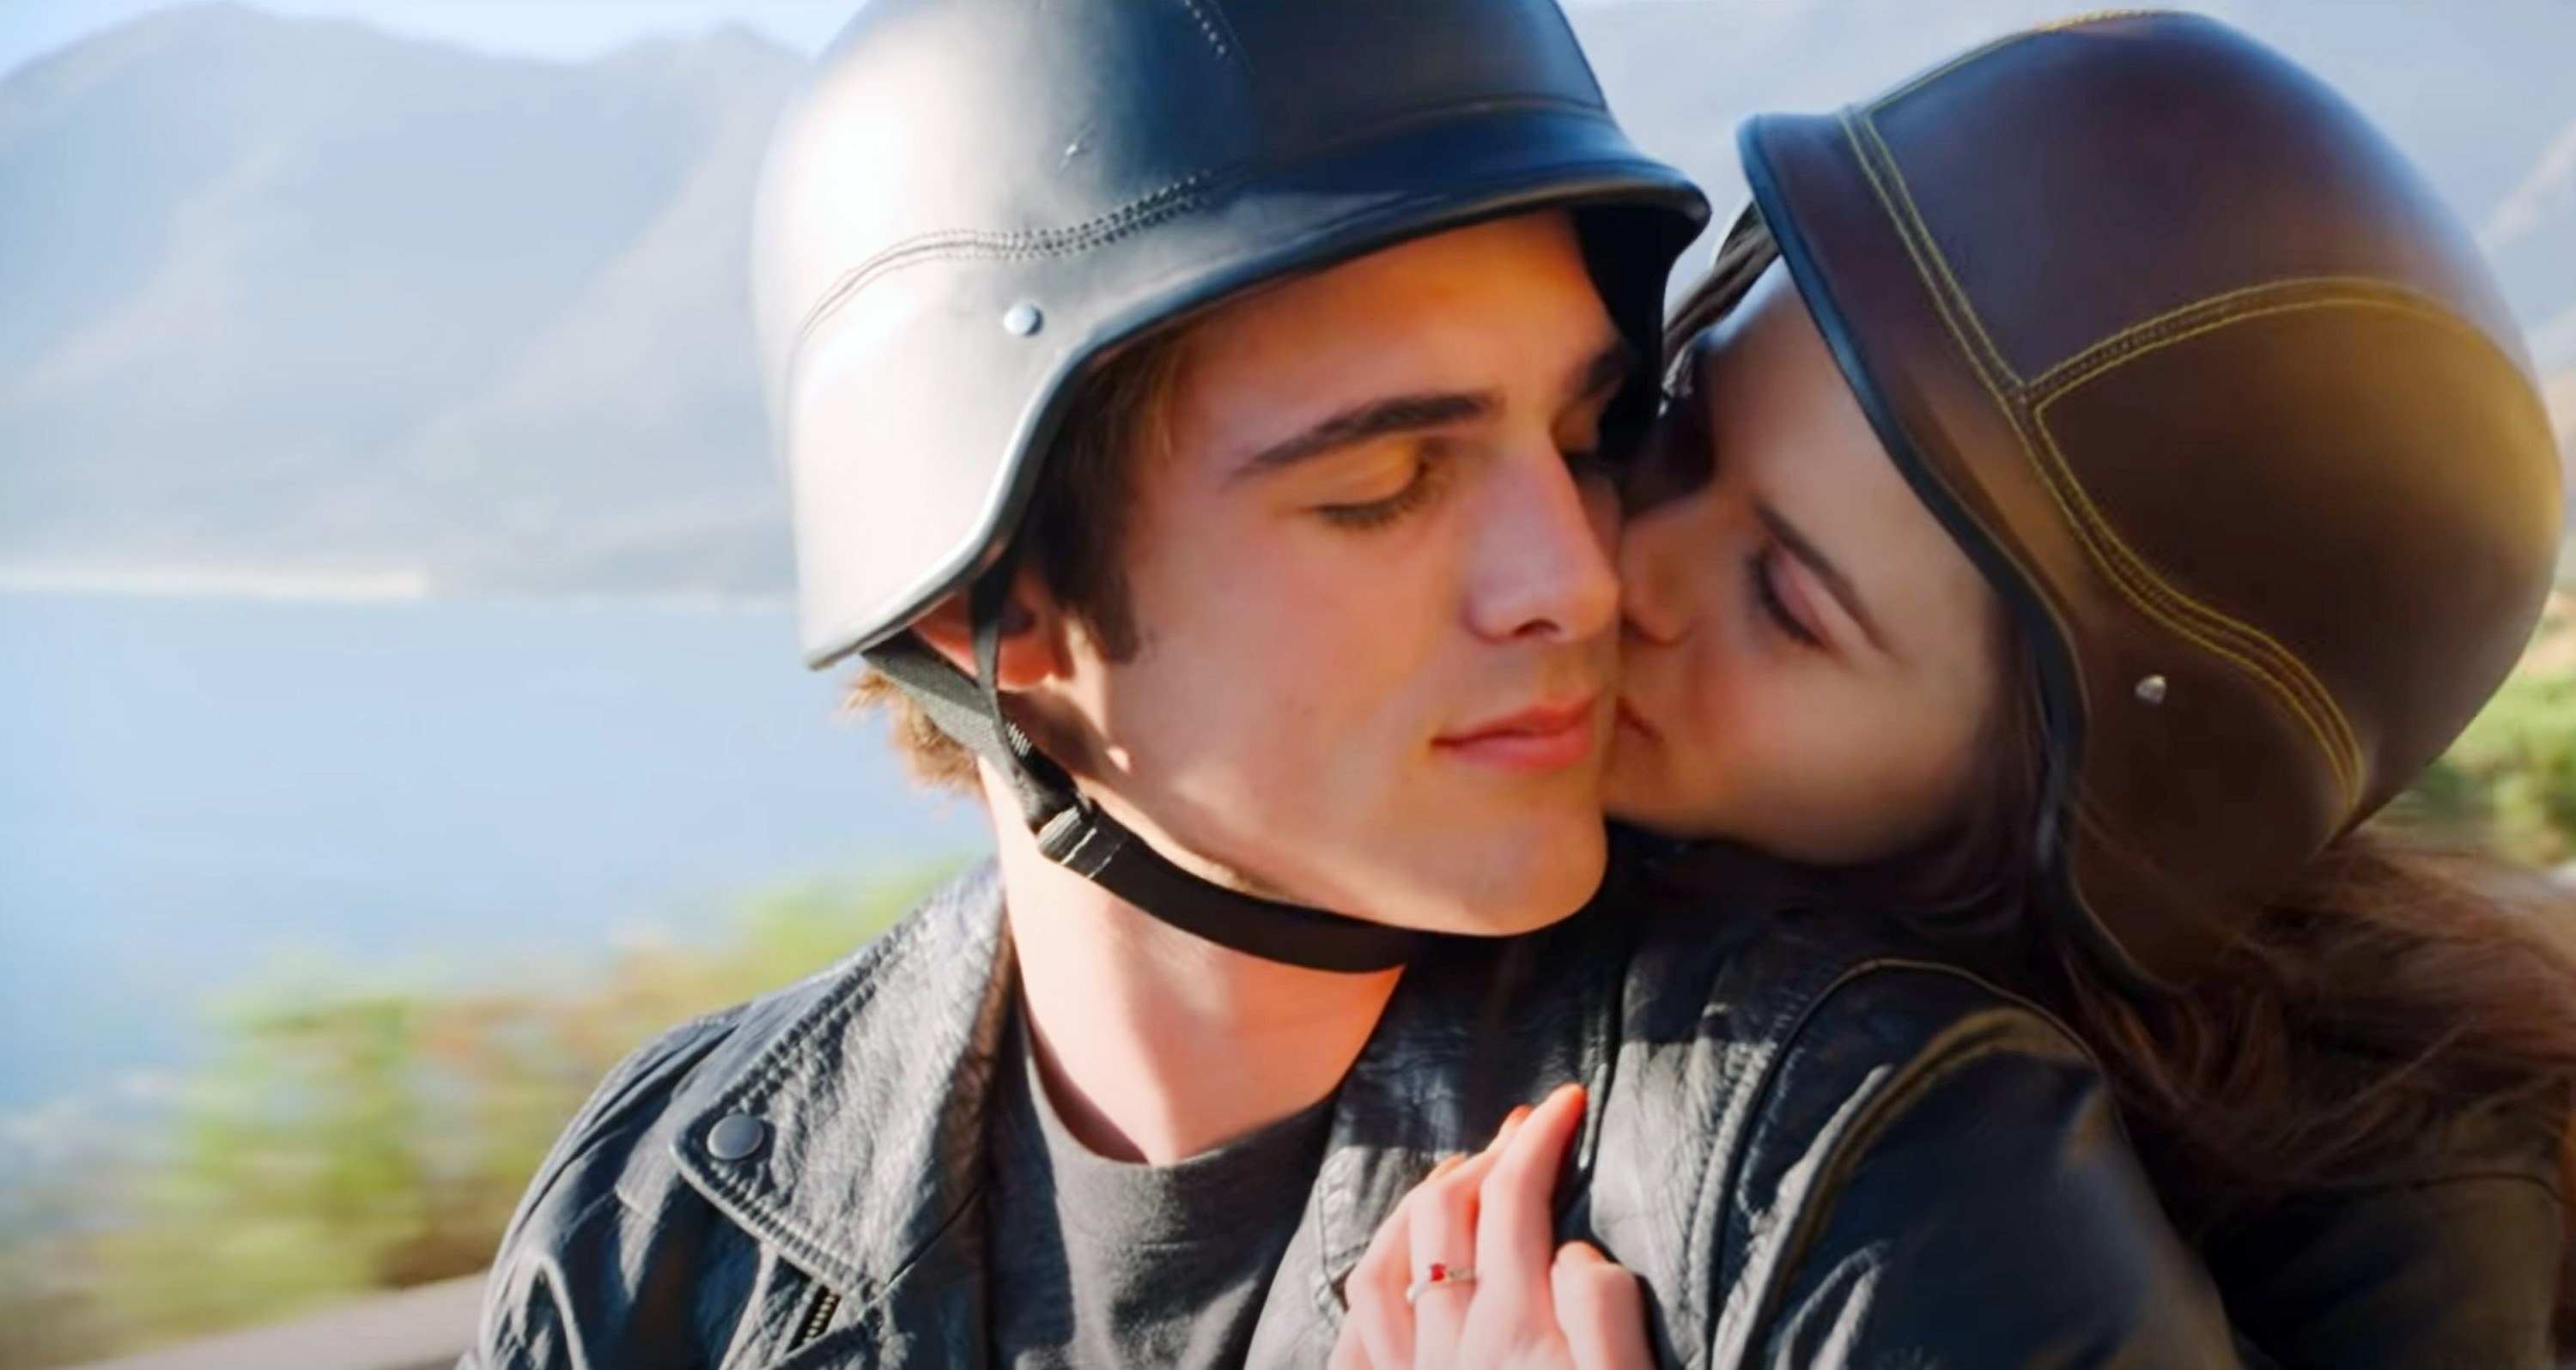 Jacob Elordi riding a motorcycle with a girl, who is kissing him